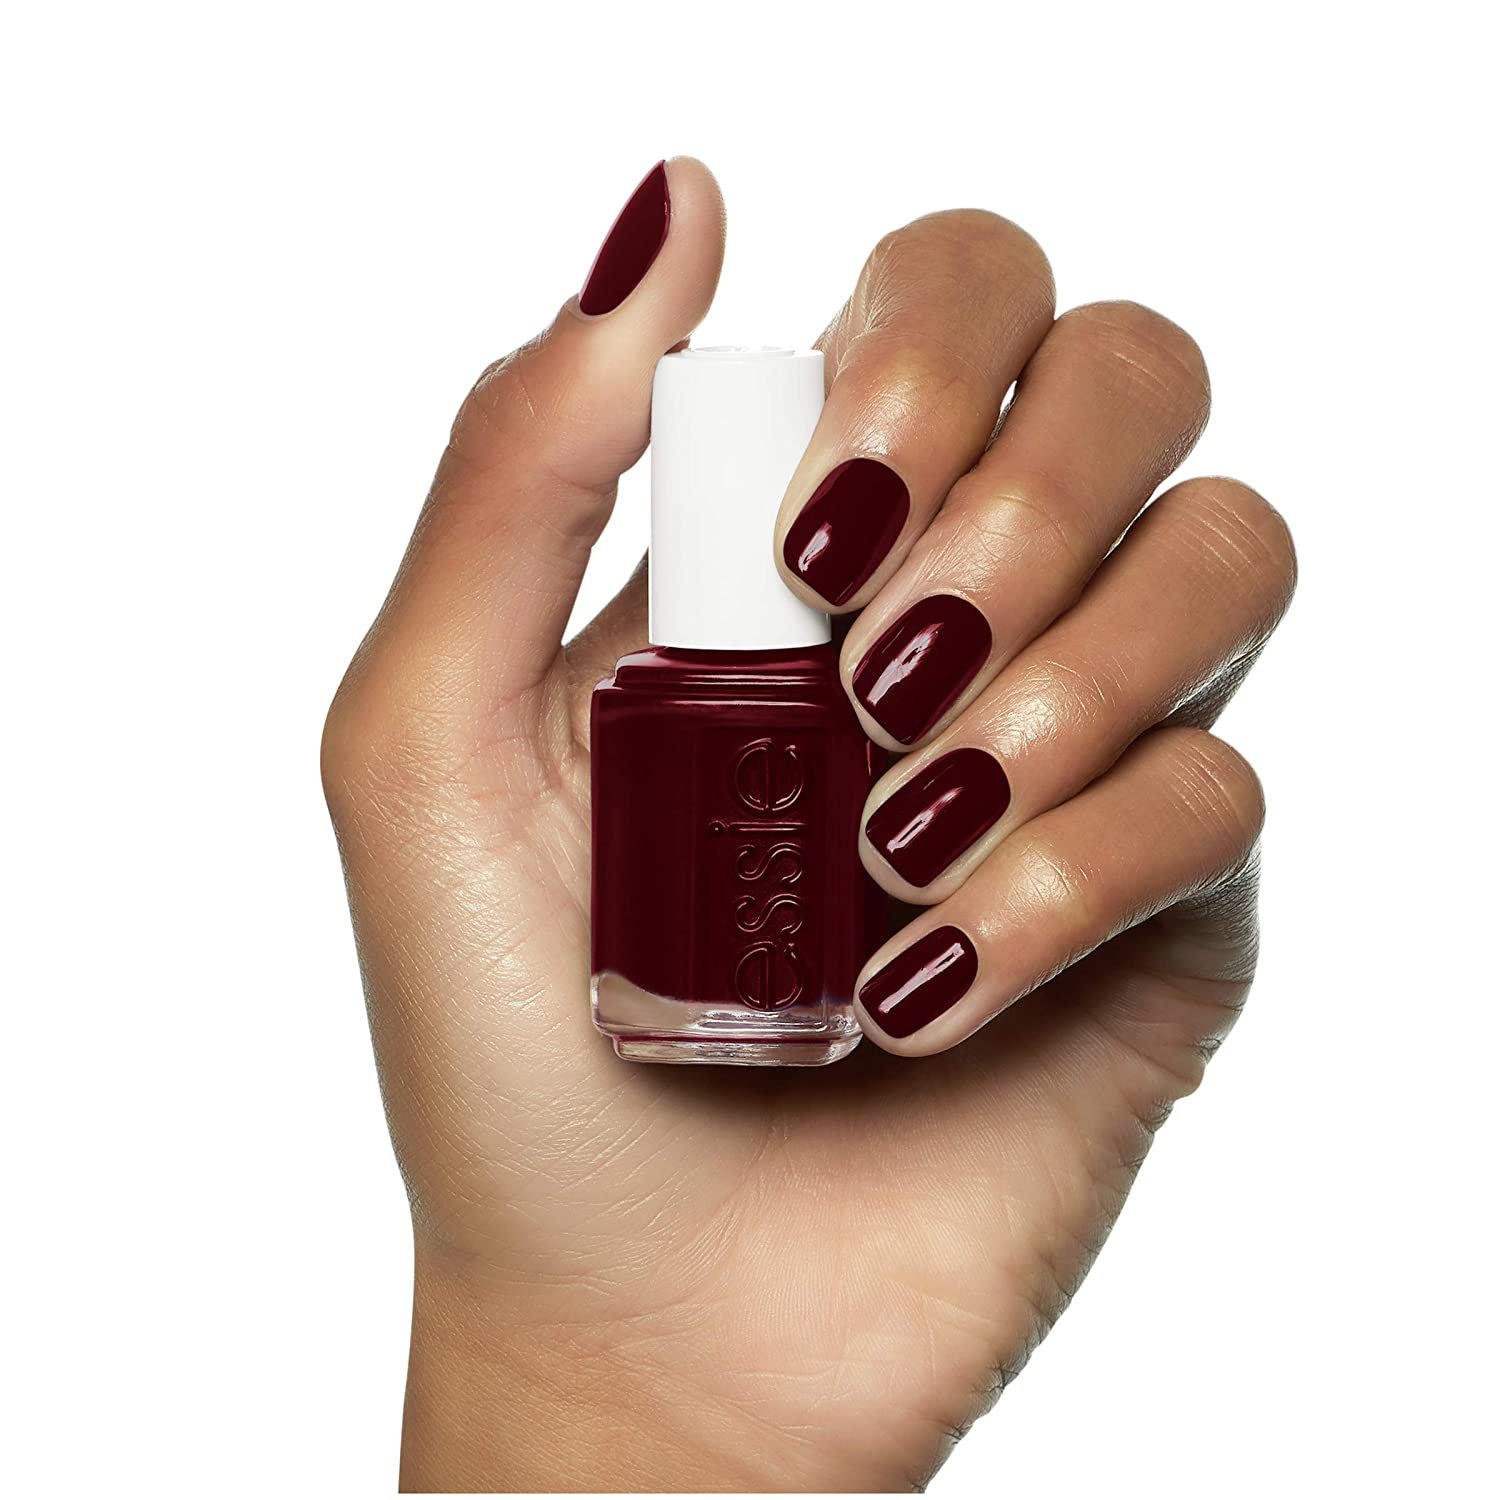 Your Signature Nail Polish Color, According To Your Myers-Briggs Personality Type